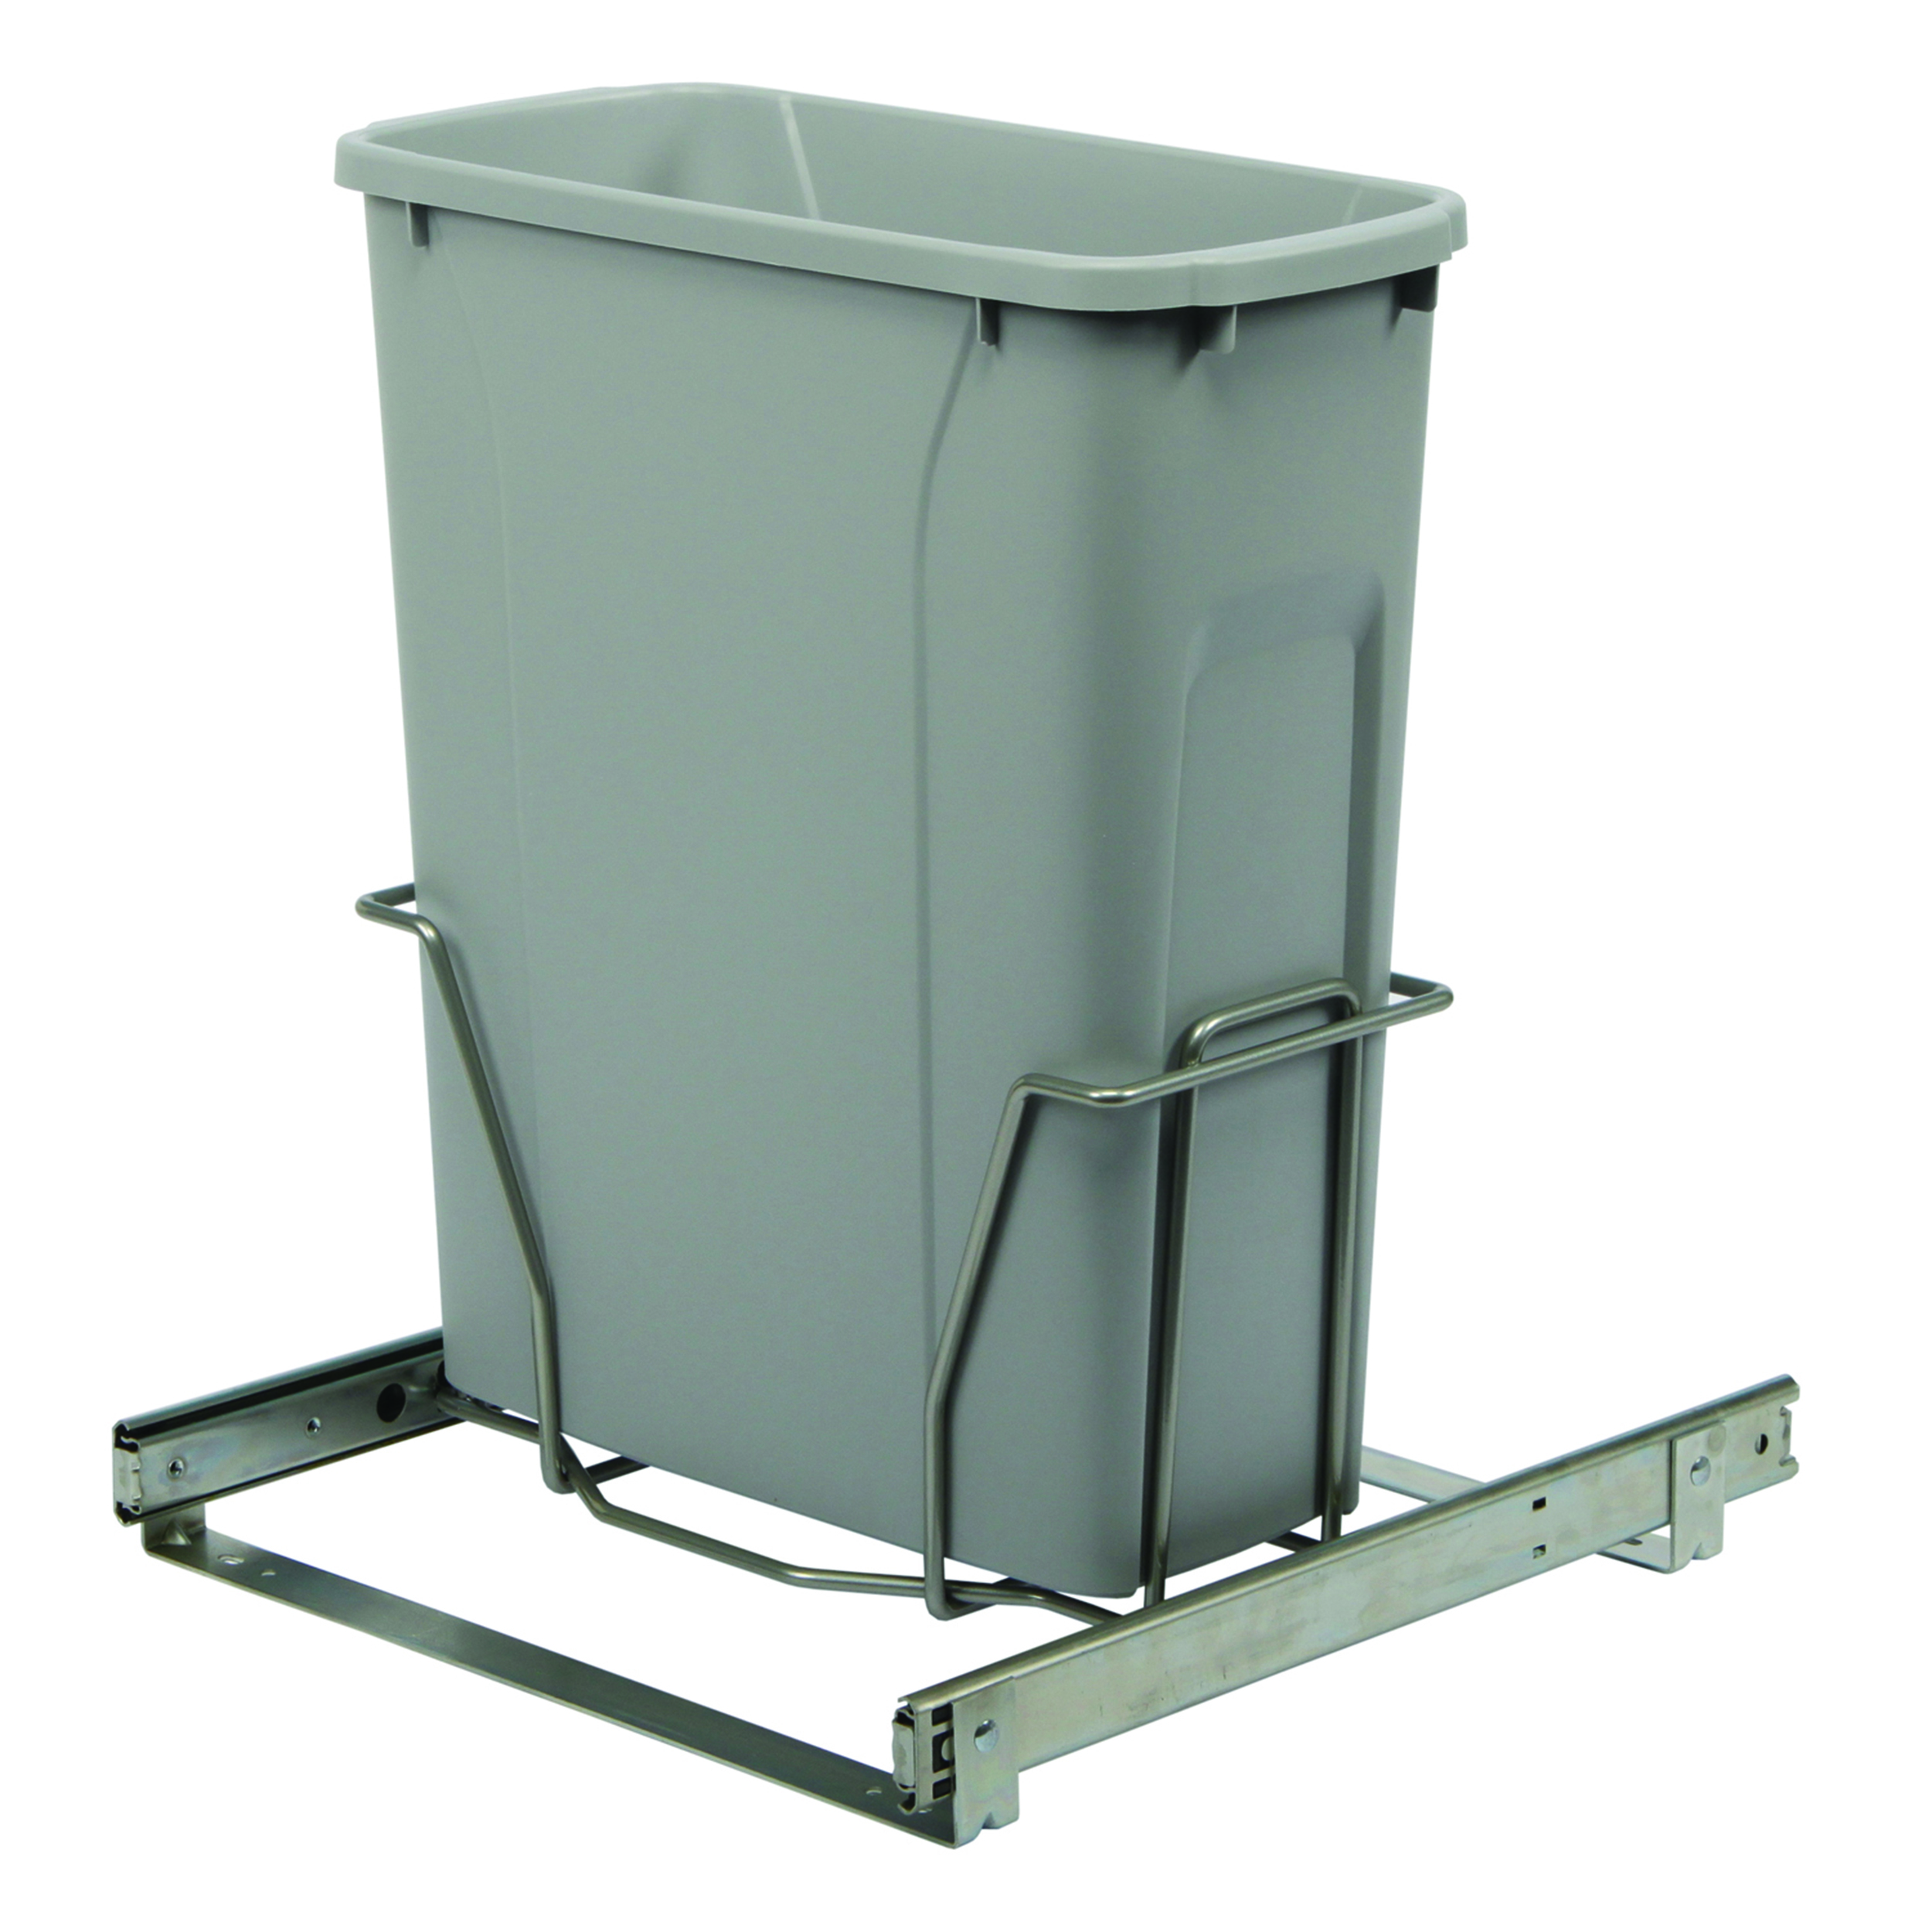 Real Solutions Single 20qt Pull-out Waste & Recyling Unit, Platinum